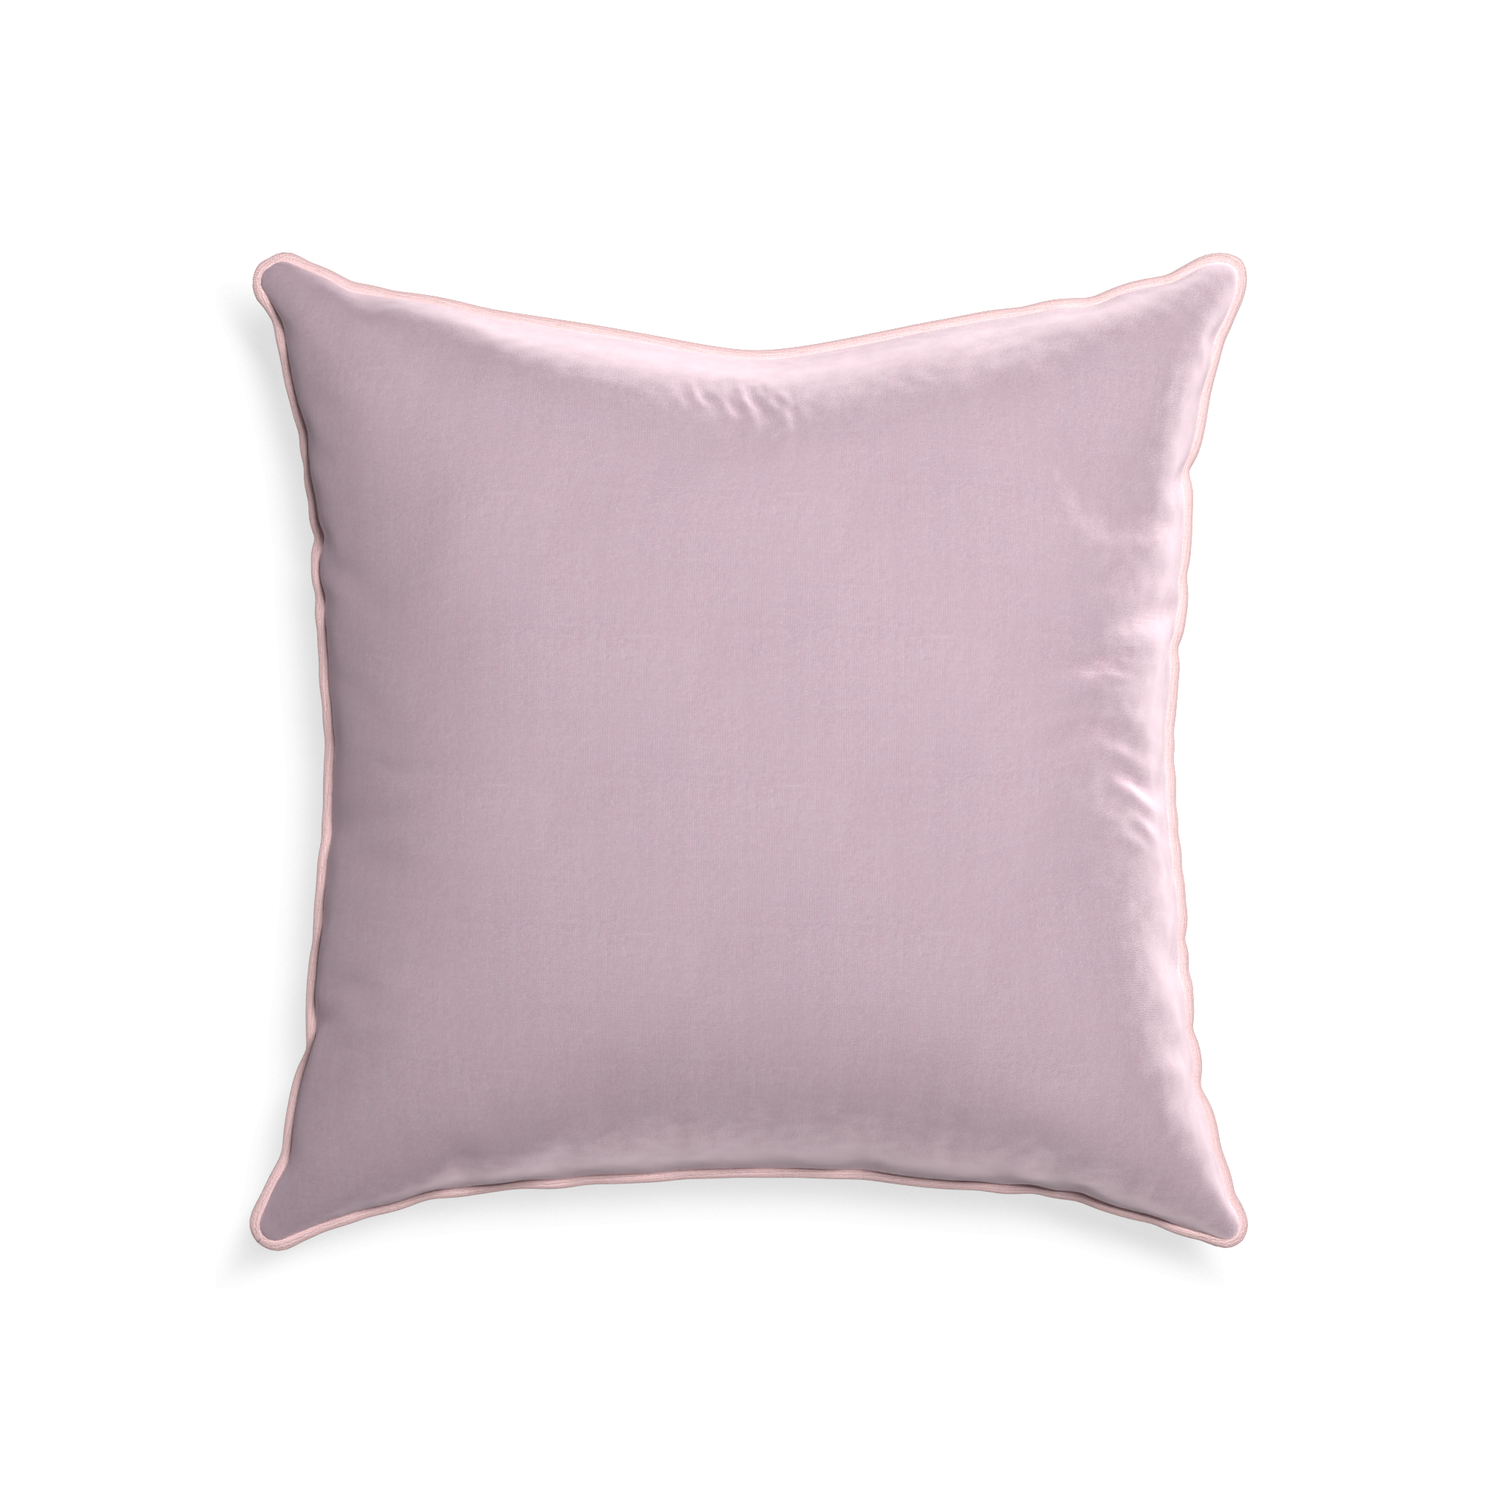 22-square lilac velvet custom lilacpillow with petal piping on white background